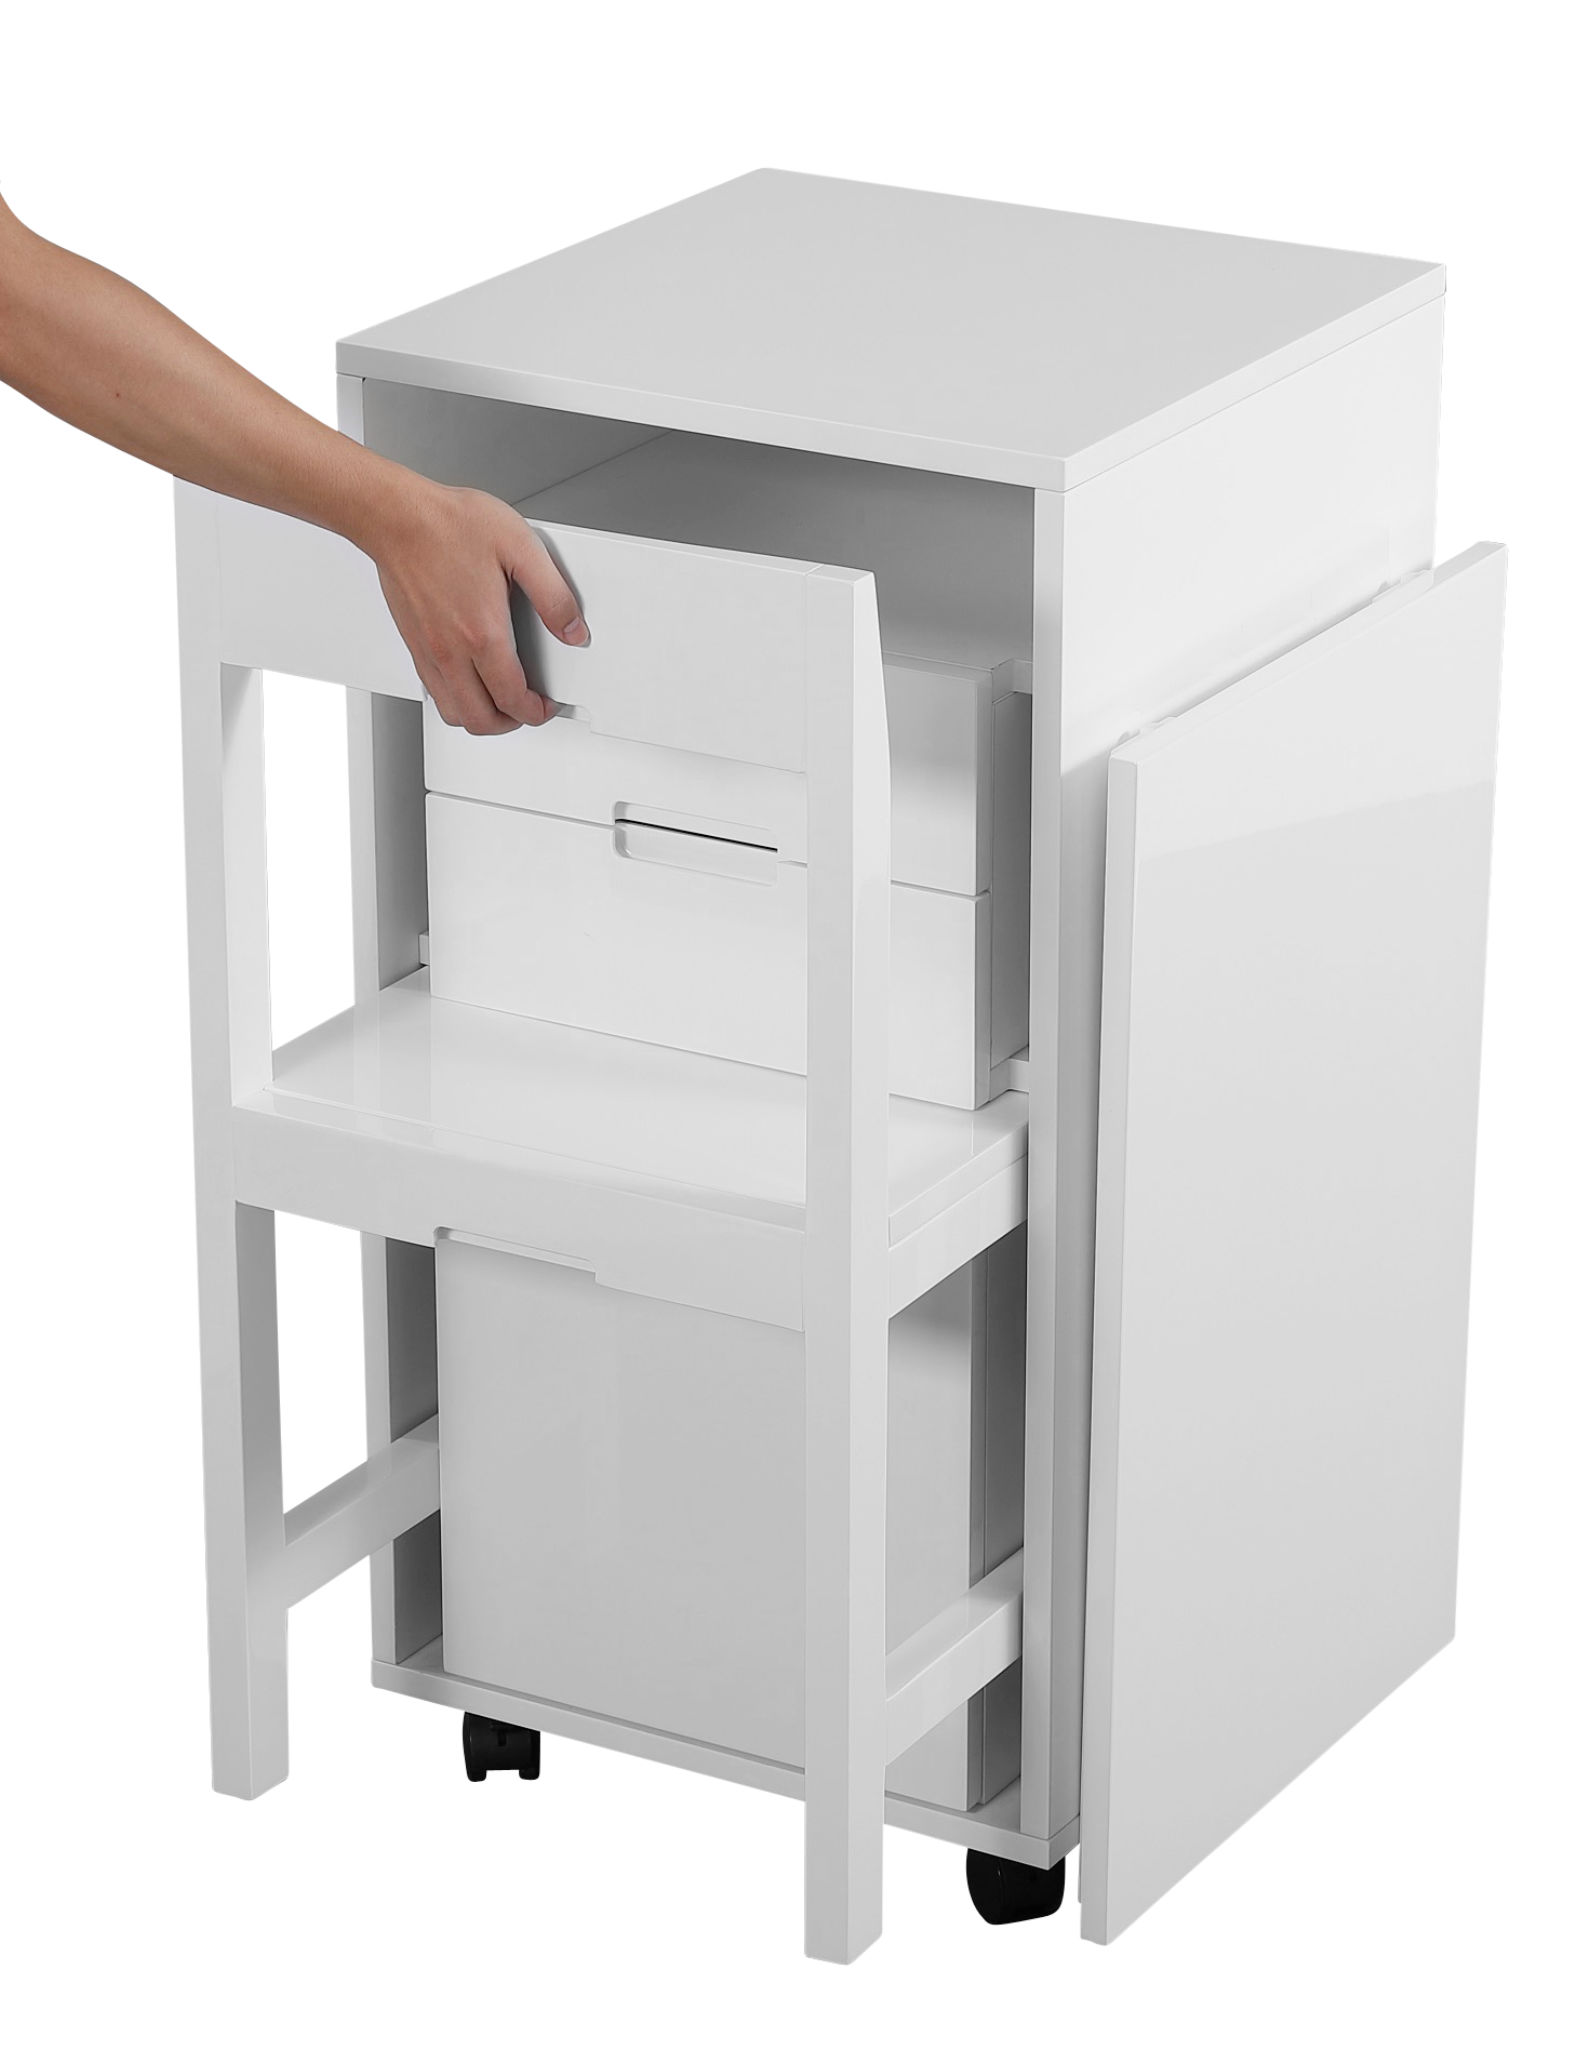 https://expandfurniture.com/wp-content/uploads/2014/05/Ludovico-glossy-white-being-opened-with-hidden-chair-in-cabinet.jpg